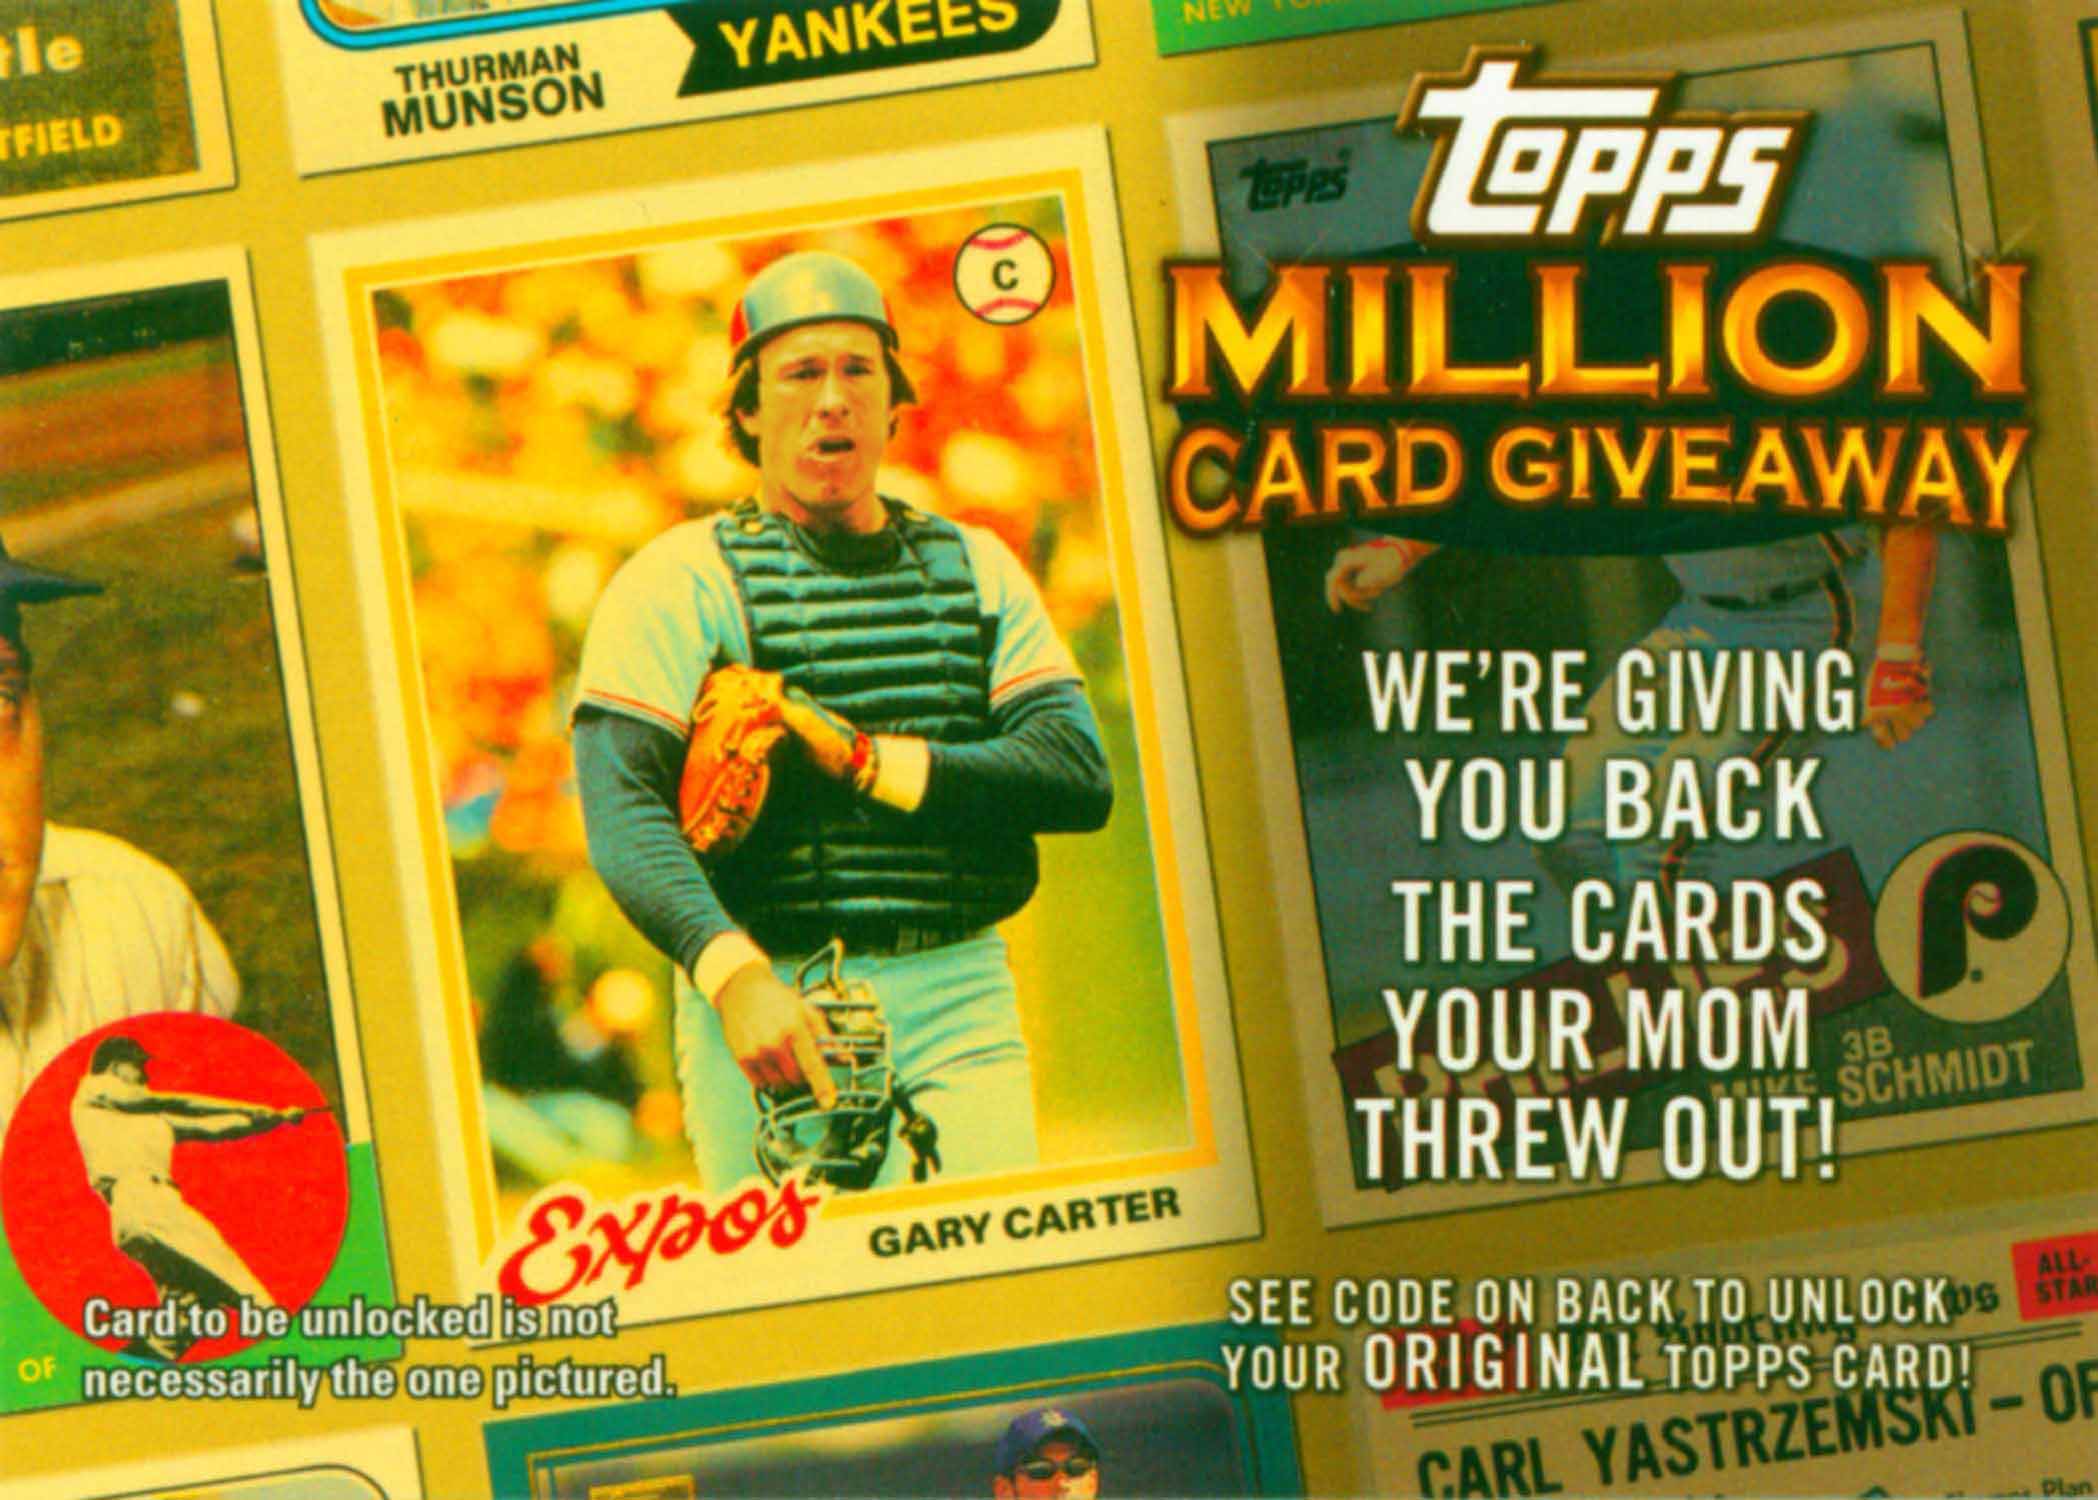 2010 Topps Million Card Giveaway